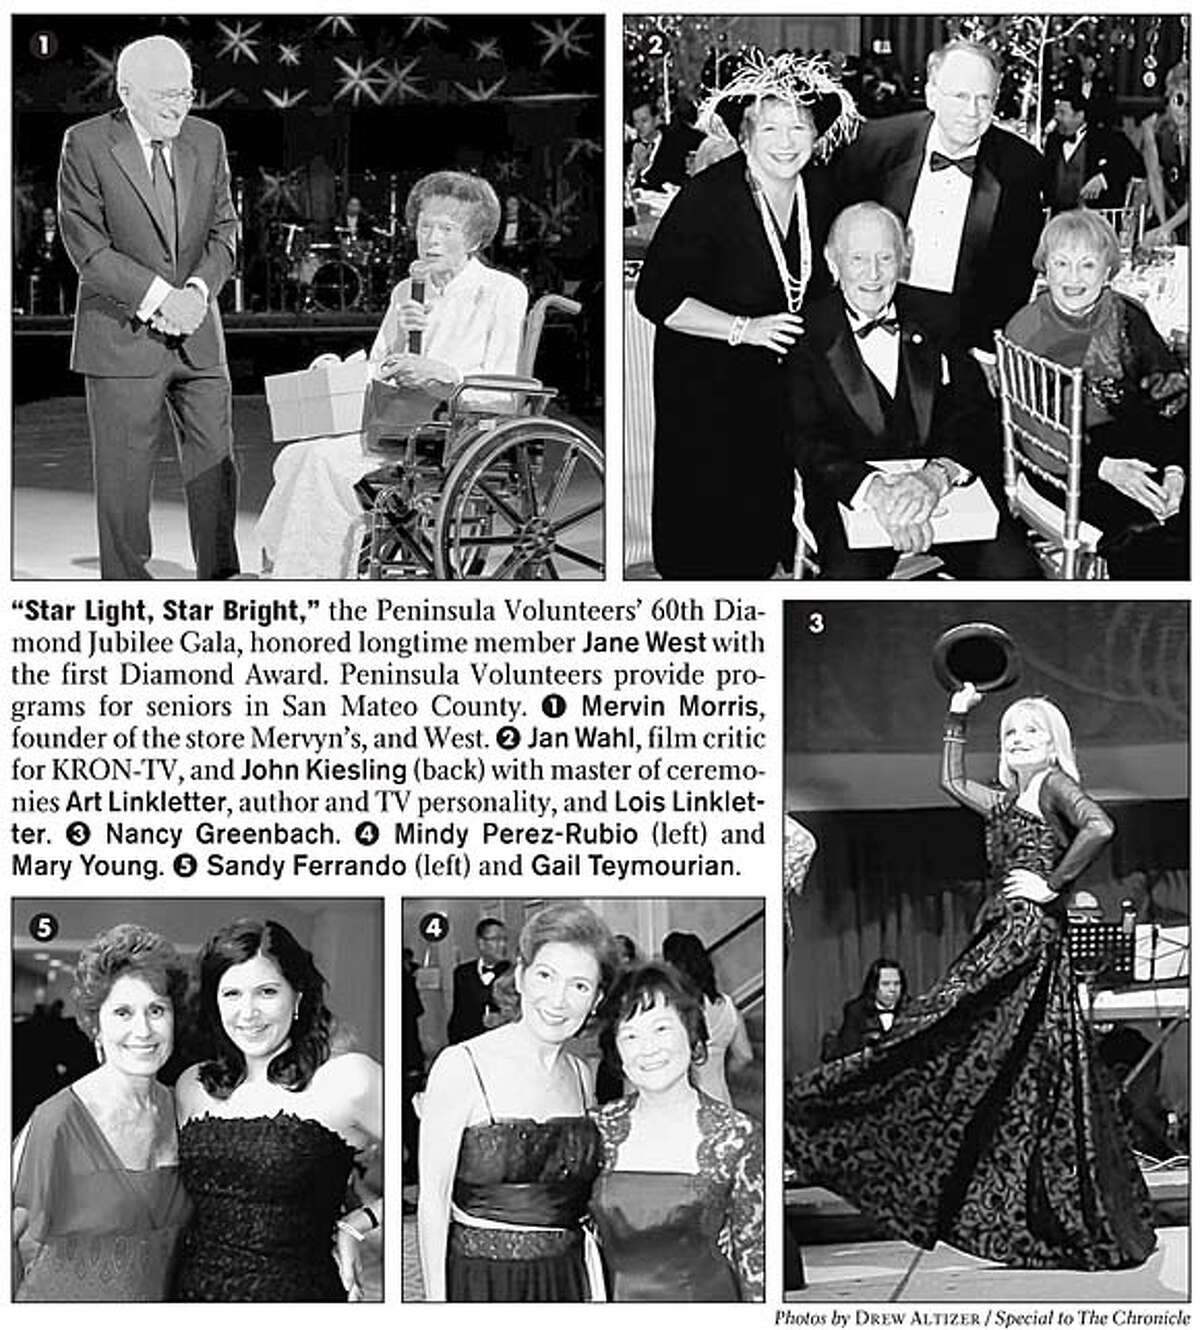 "Star Light, Star Bright," the Peninsula Volunteers' 60th Diamond Jubilee Gala, honored longtime member Jane West with the first Diamond Award. Peninsula Volunteers provide programs for seniors in San Mateo County. Photos by Drew Altizer, special to the Chronicle